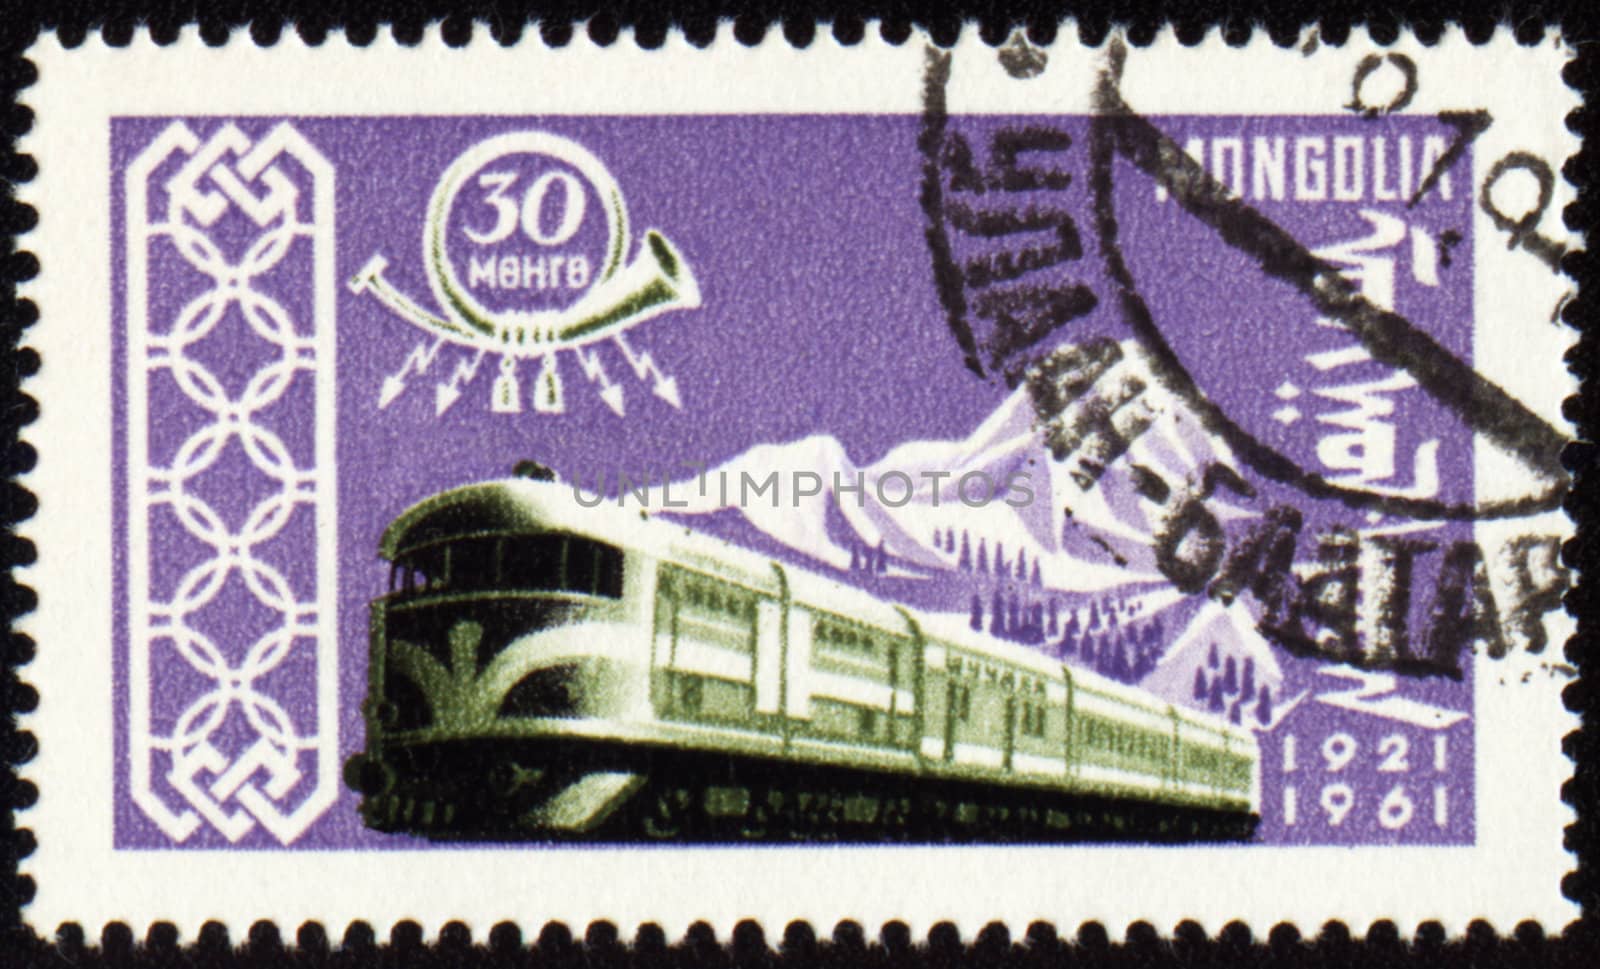 Train on post stamp by wander